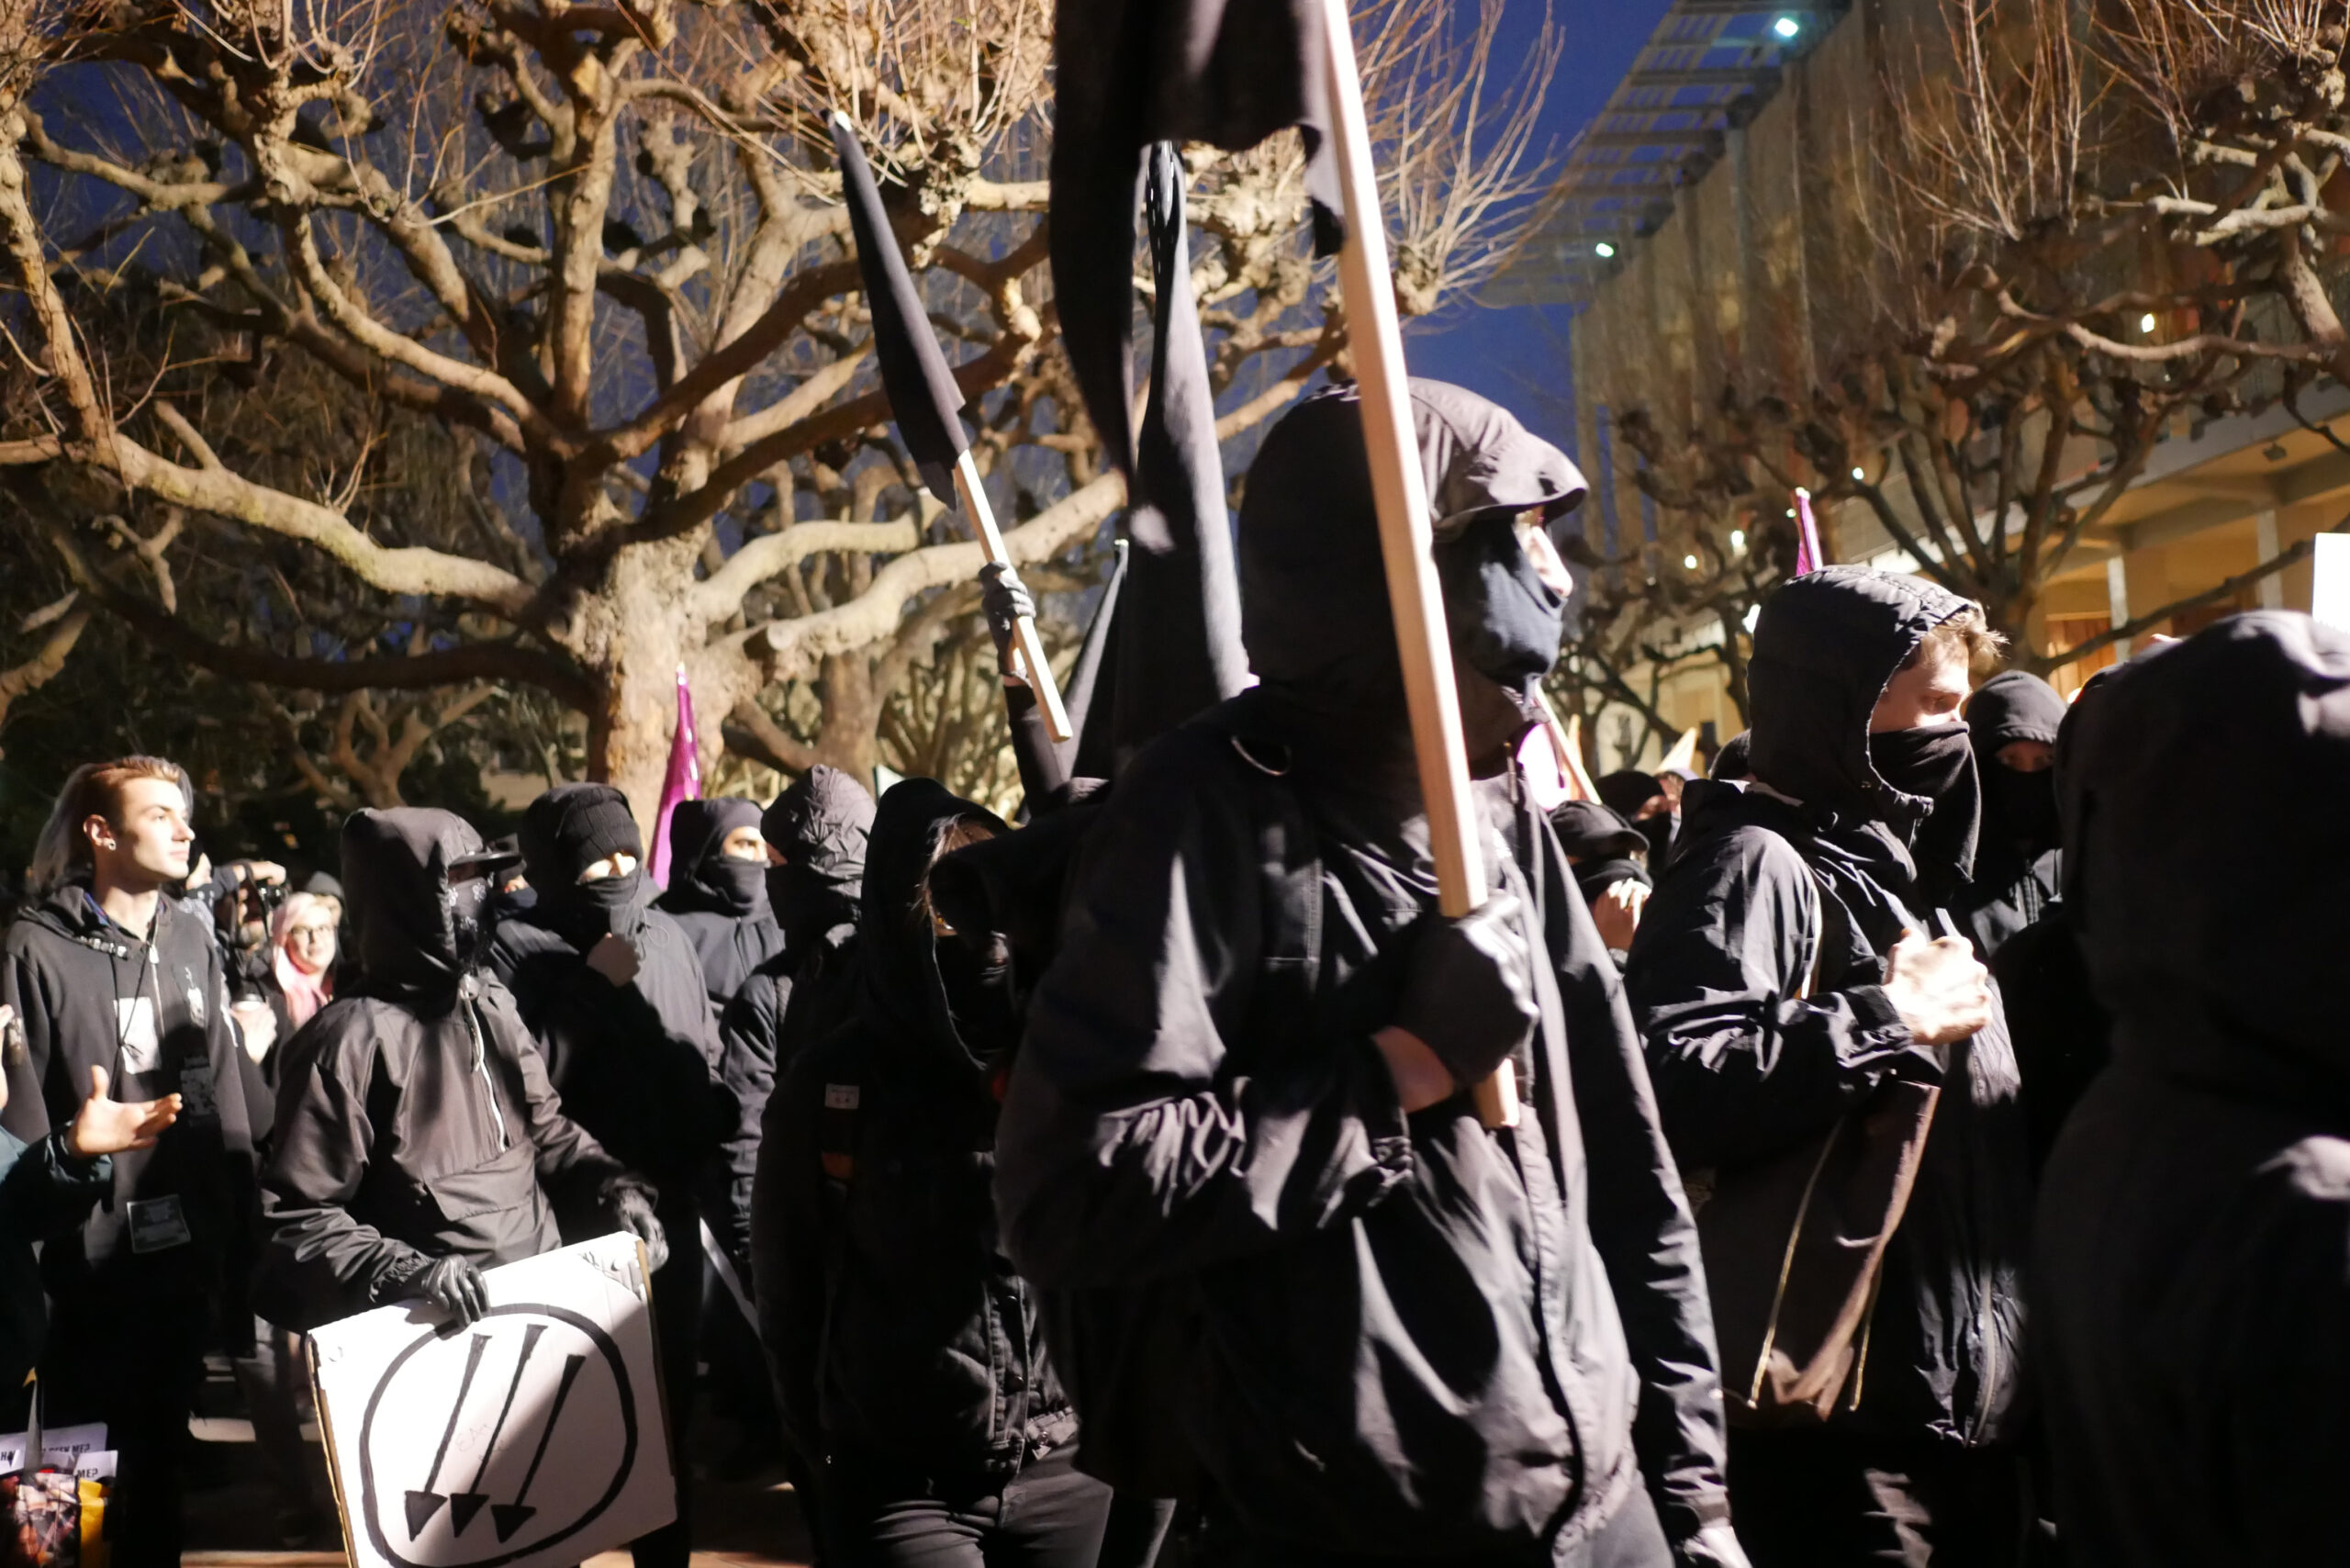 February 1, 2017 - Berkeley, California, U.S - Anti-fascist protesters dressed in black arrive at a protest on the University of California-Berkeley campus against Milo Yiannopoulos, a Breitbart writer who has grown notorious for his comments targeting women and minorities. Yiannopoulos was scheduled to speak Feb. 1 at the invitation of College Republicans but he left the campus an hour-and-a-half before his scheduled talk as protesters grew unruly, throwing objects and setting off a bonfire (Credit Image: © Jeremy Breningstall via ZUMA Wire)